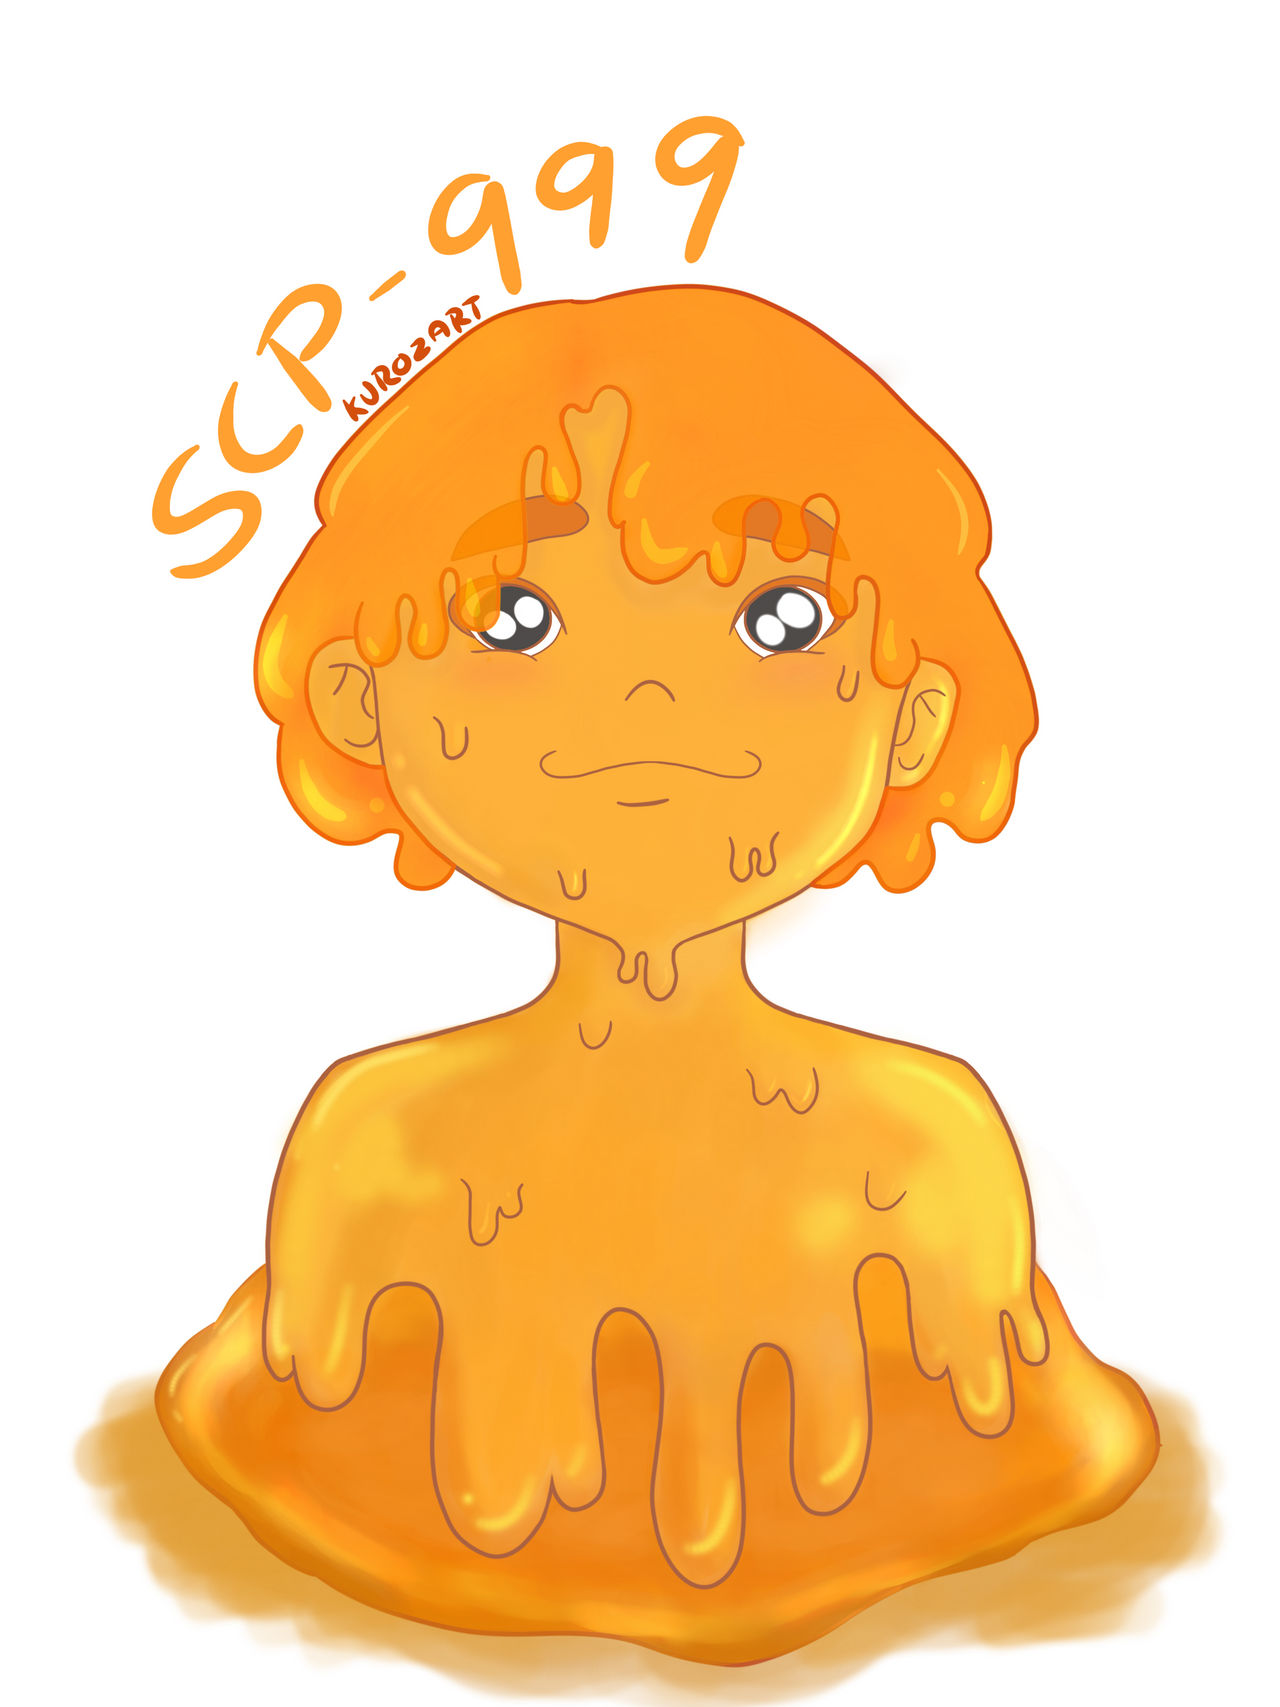 SCP-999, Nicest SCP